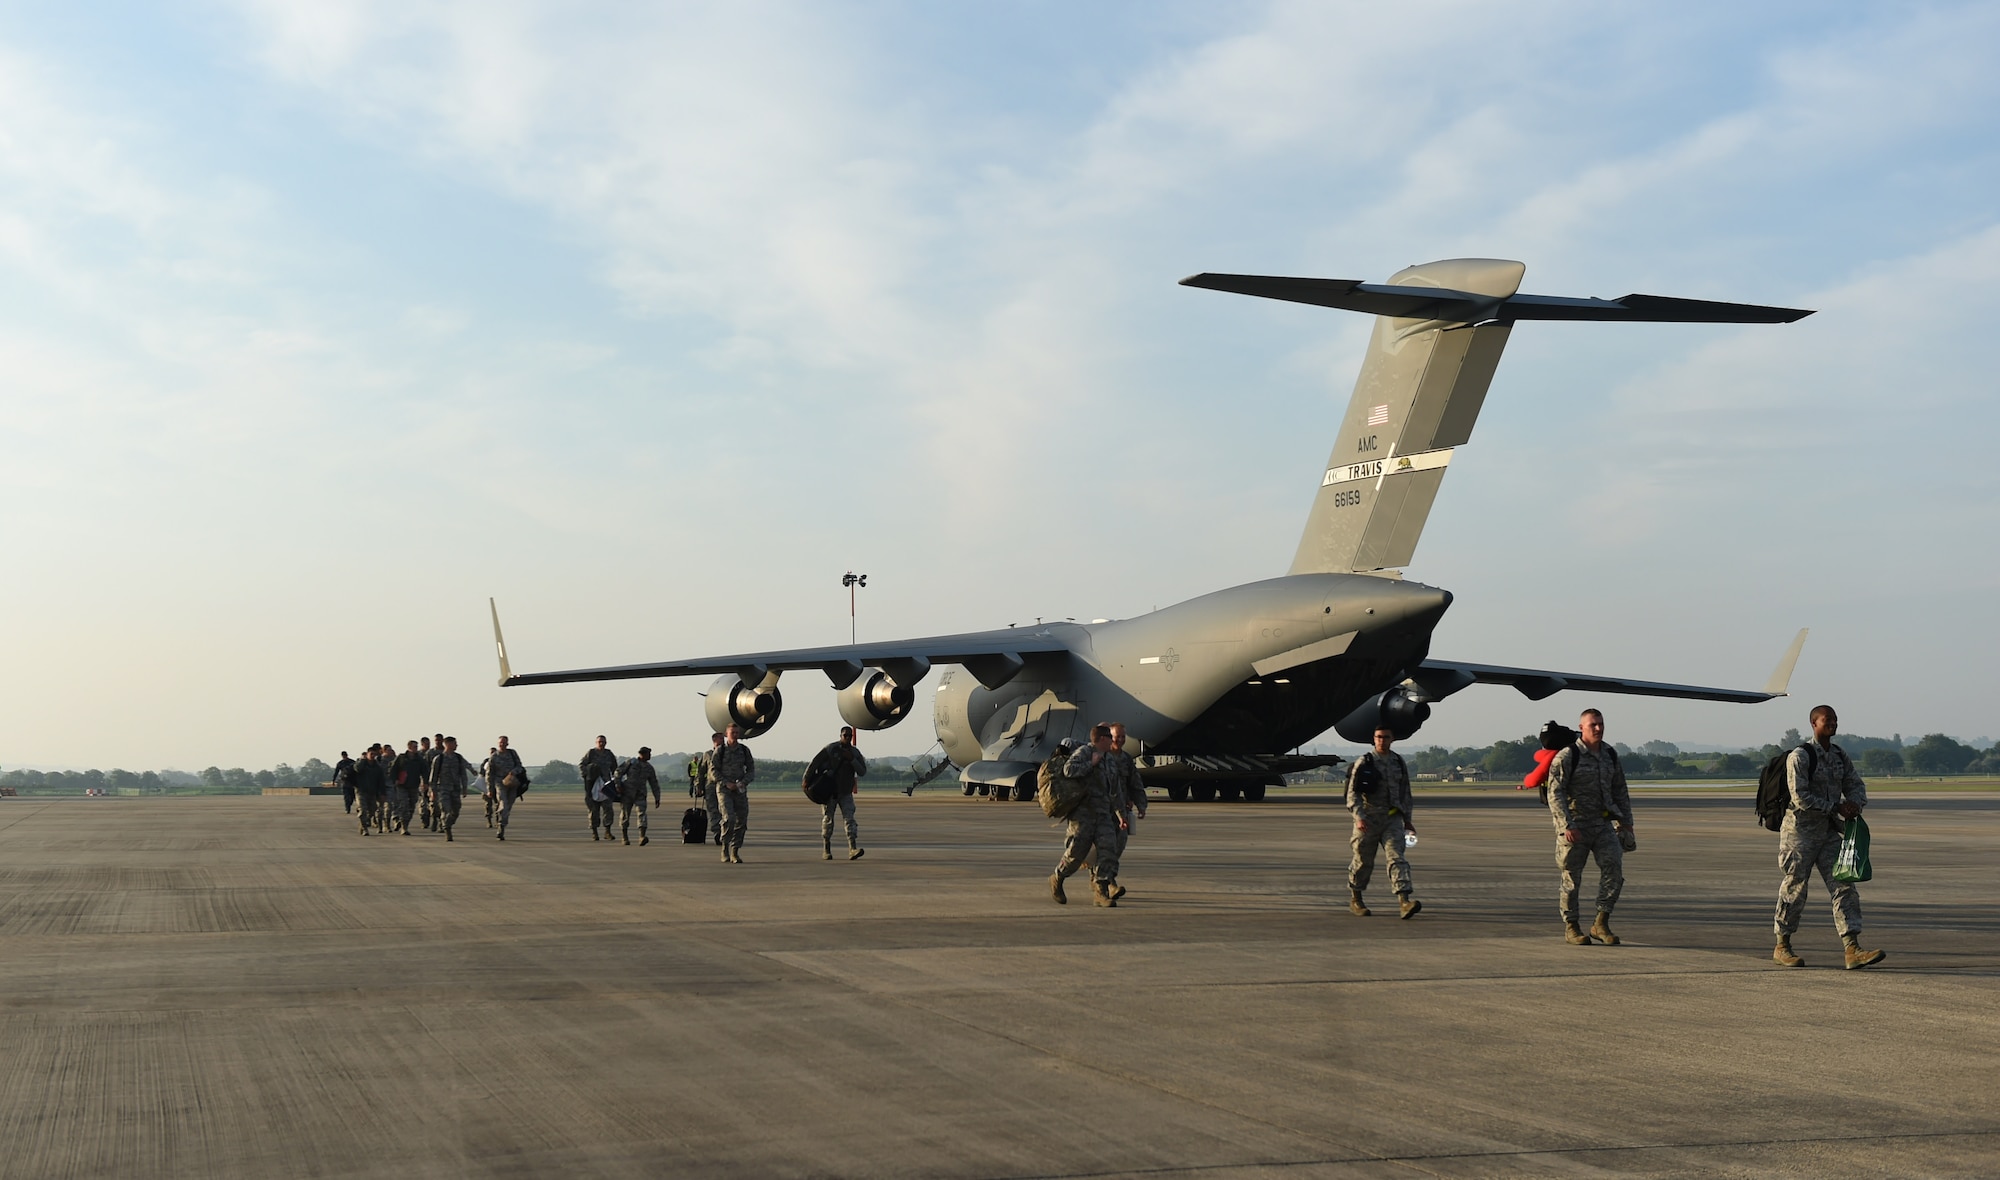 U.S. Air Force Airmen assigned to the 345th Expeditionary Bomb Squadron from Dyess Air Force Base, Texas, arrive at RAF Fairford, U.K., on a C-17 Globemaster III from Travis AFB, California, May 22, 2018. Dyess Airmen have deployed to the United Kingdom in support of NATO cross-servicing exercises which regularly include combined theater security engagements with allies and partners, demonstrating the U.S. capability to command, control and conduct bomber missions across the globe. (U.S. Air Force photo by Senior Airman Emily Copeland)